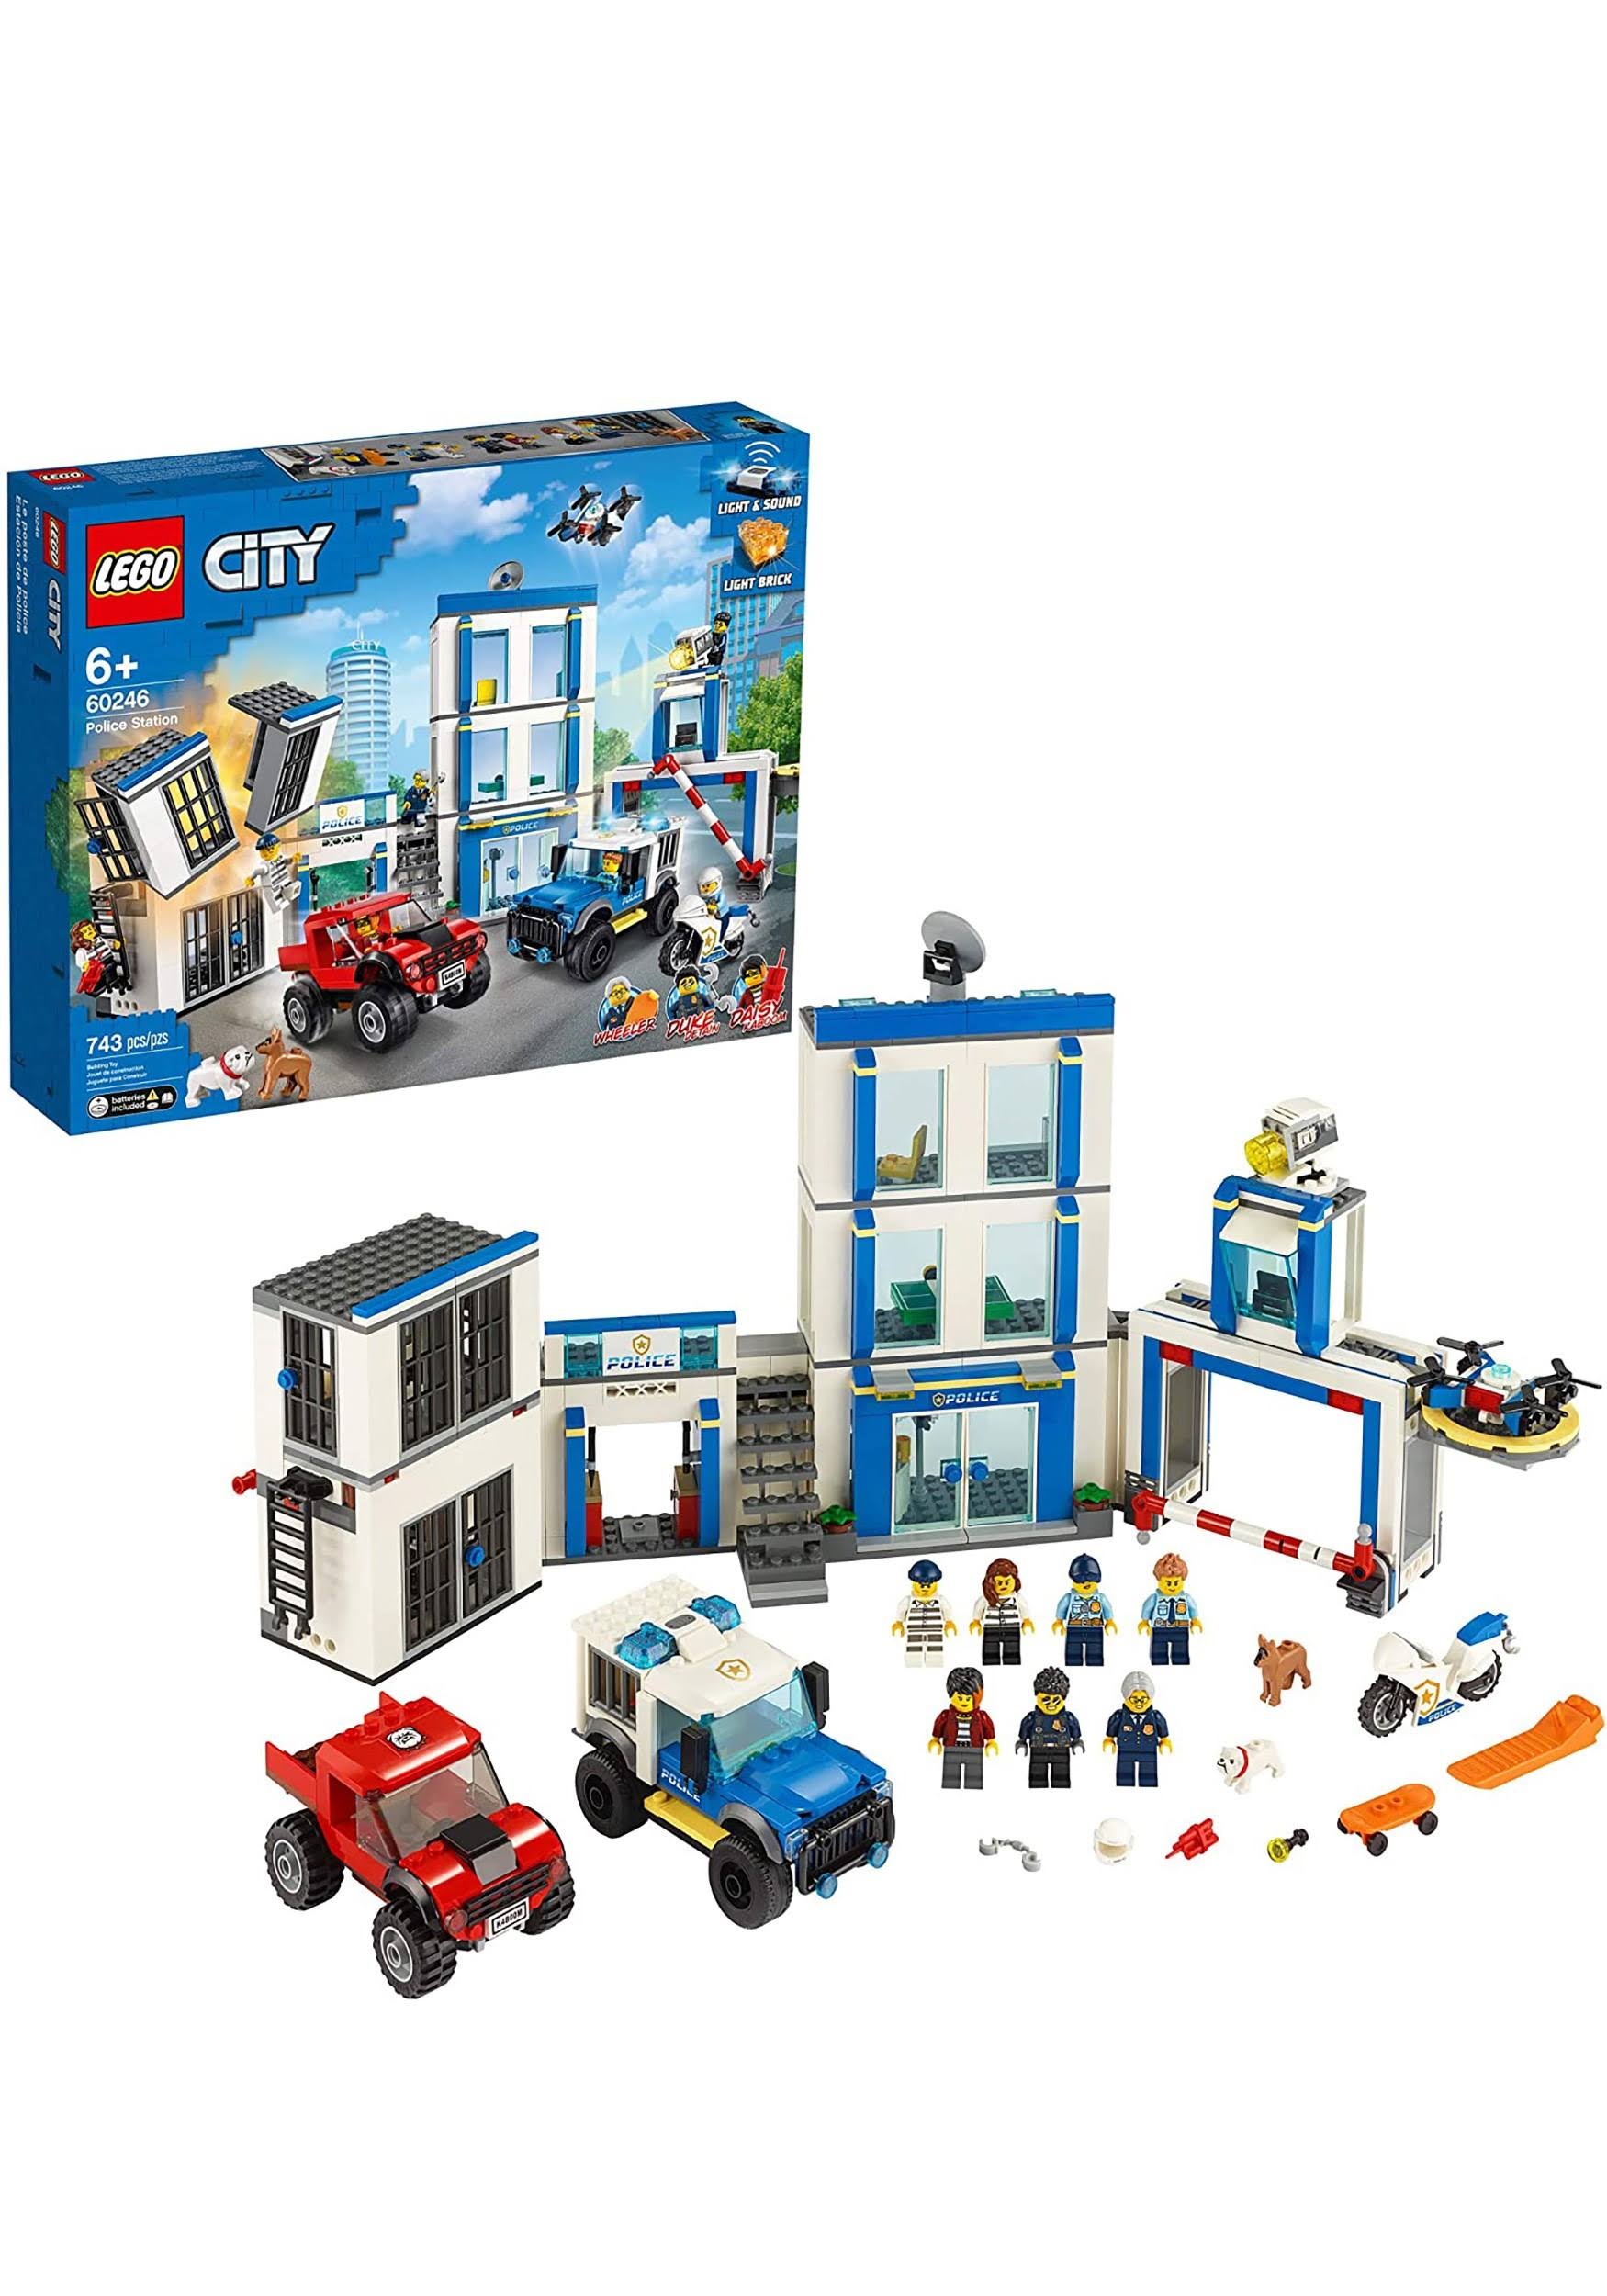 LEGO City Police Station 60246 Police Toy, Fun Building Set for Kids (